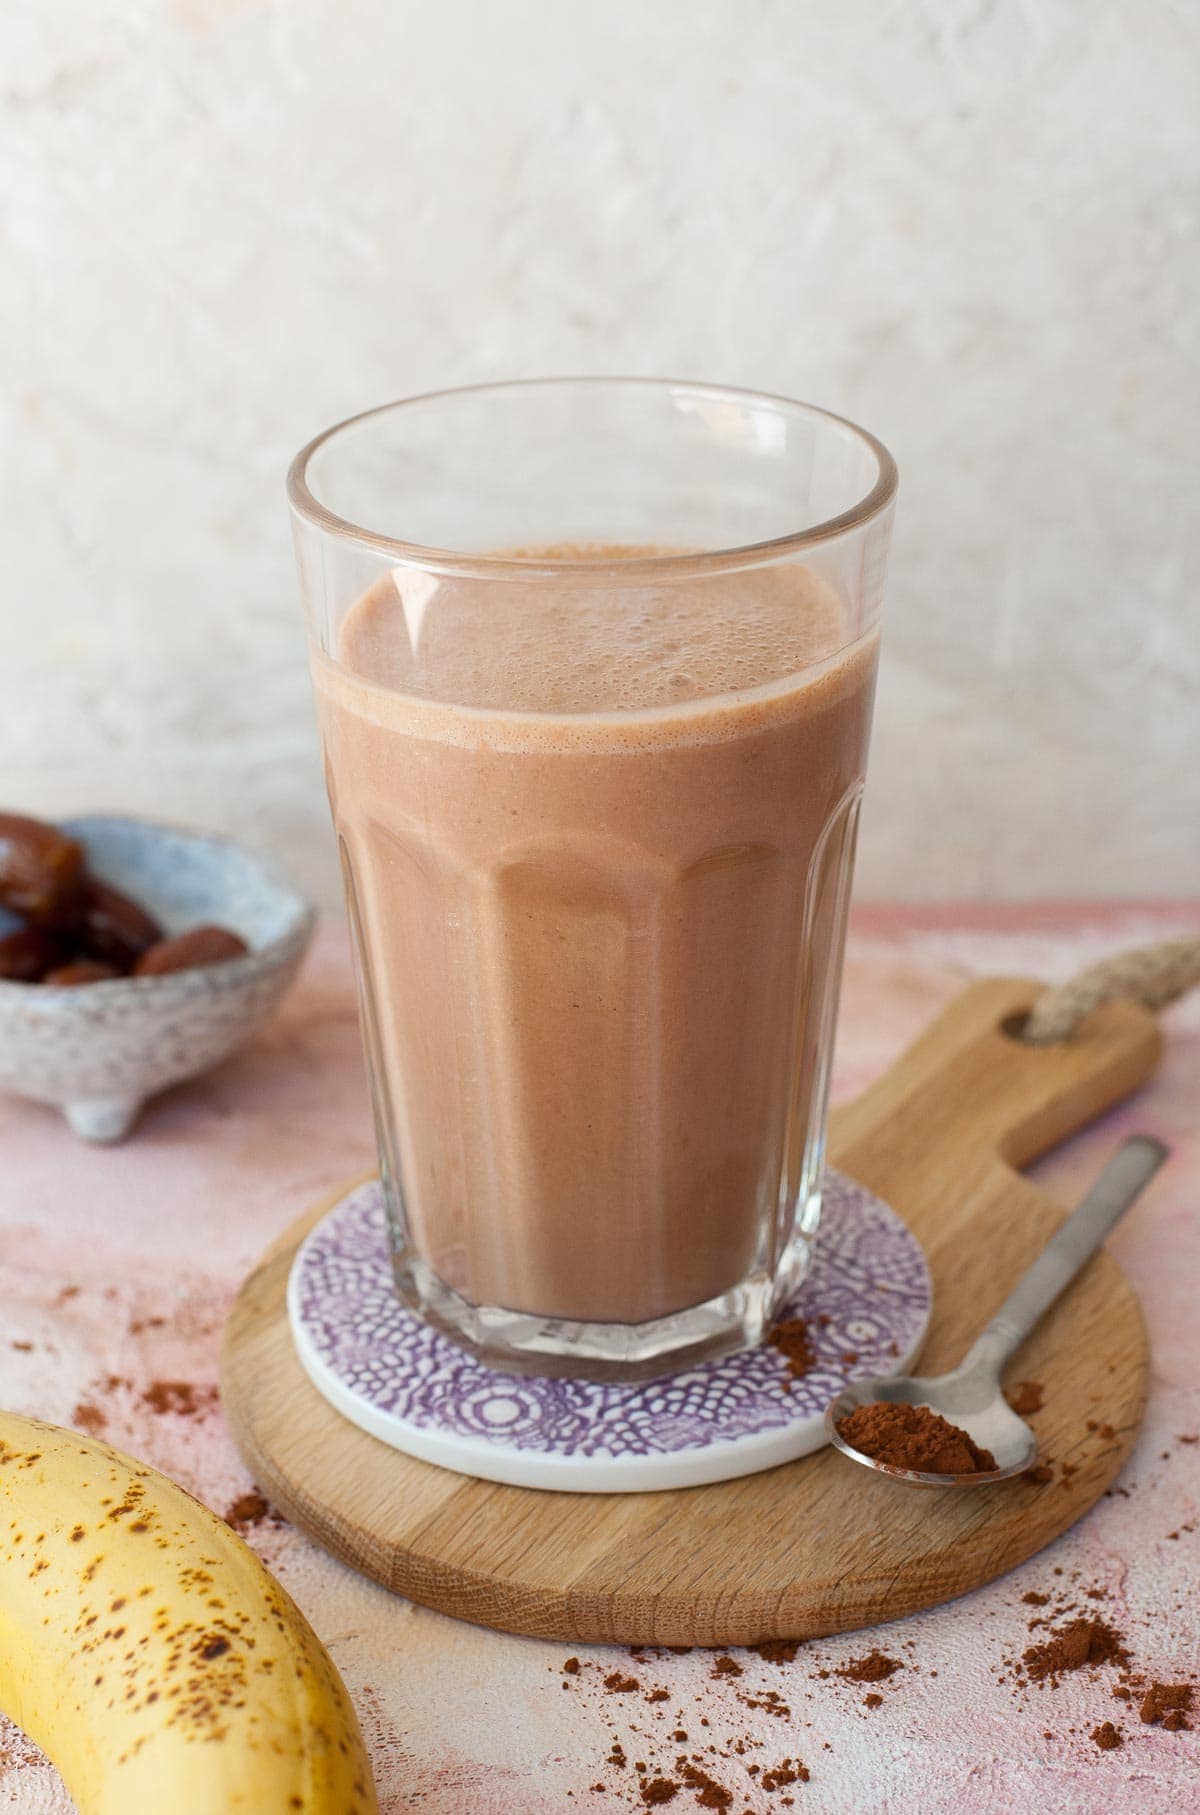 Chocolate peanut butter banana smoothie - Everyday Delicious